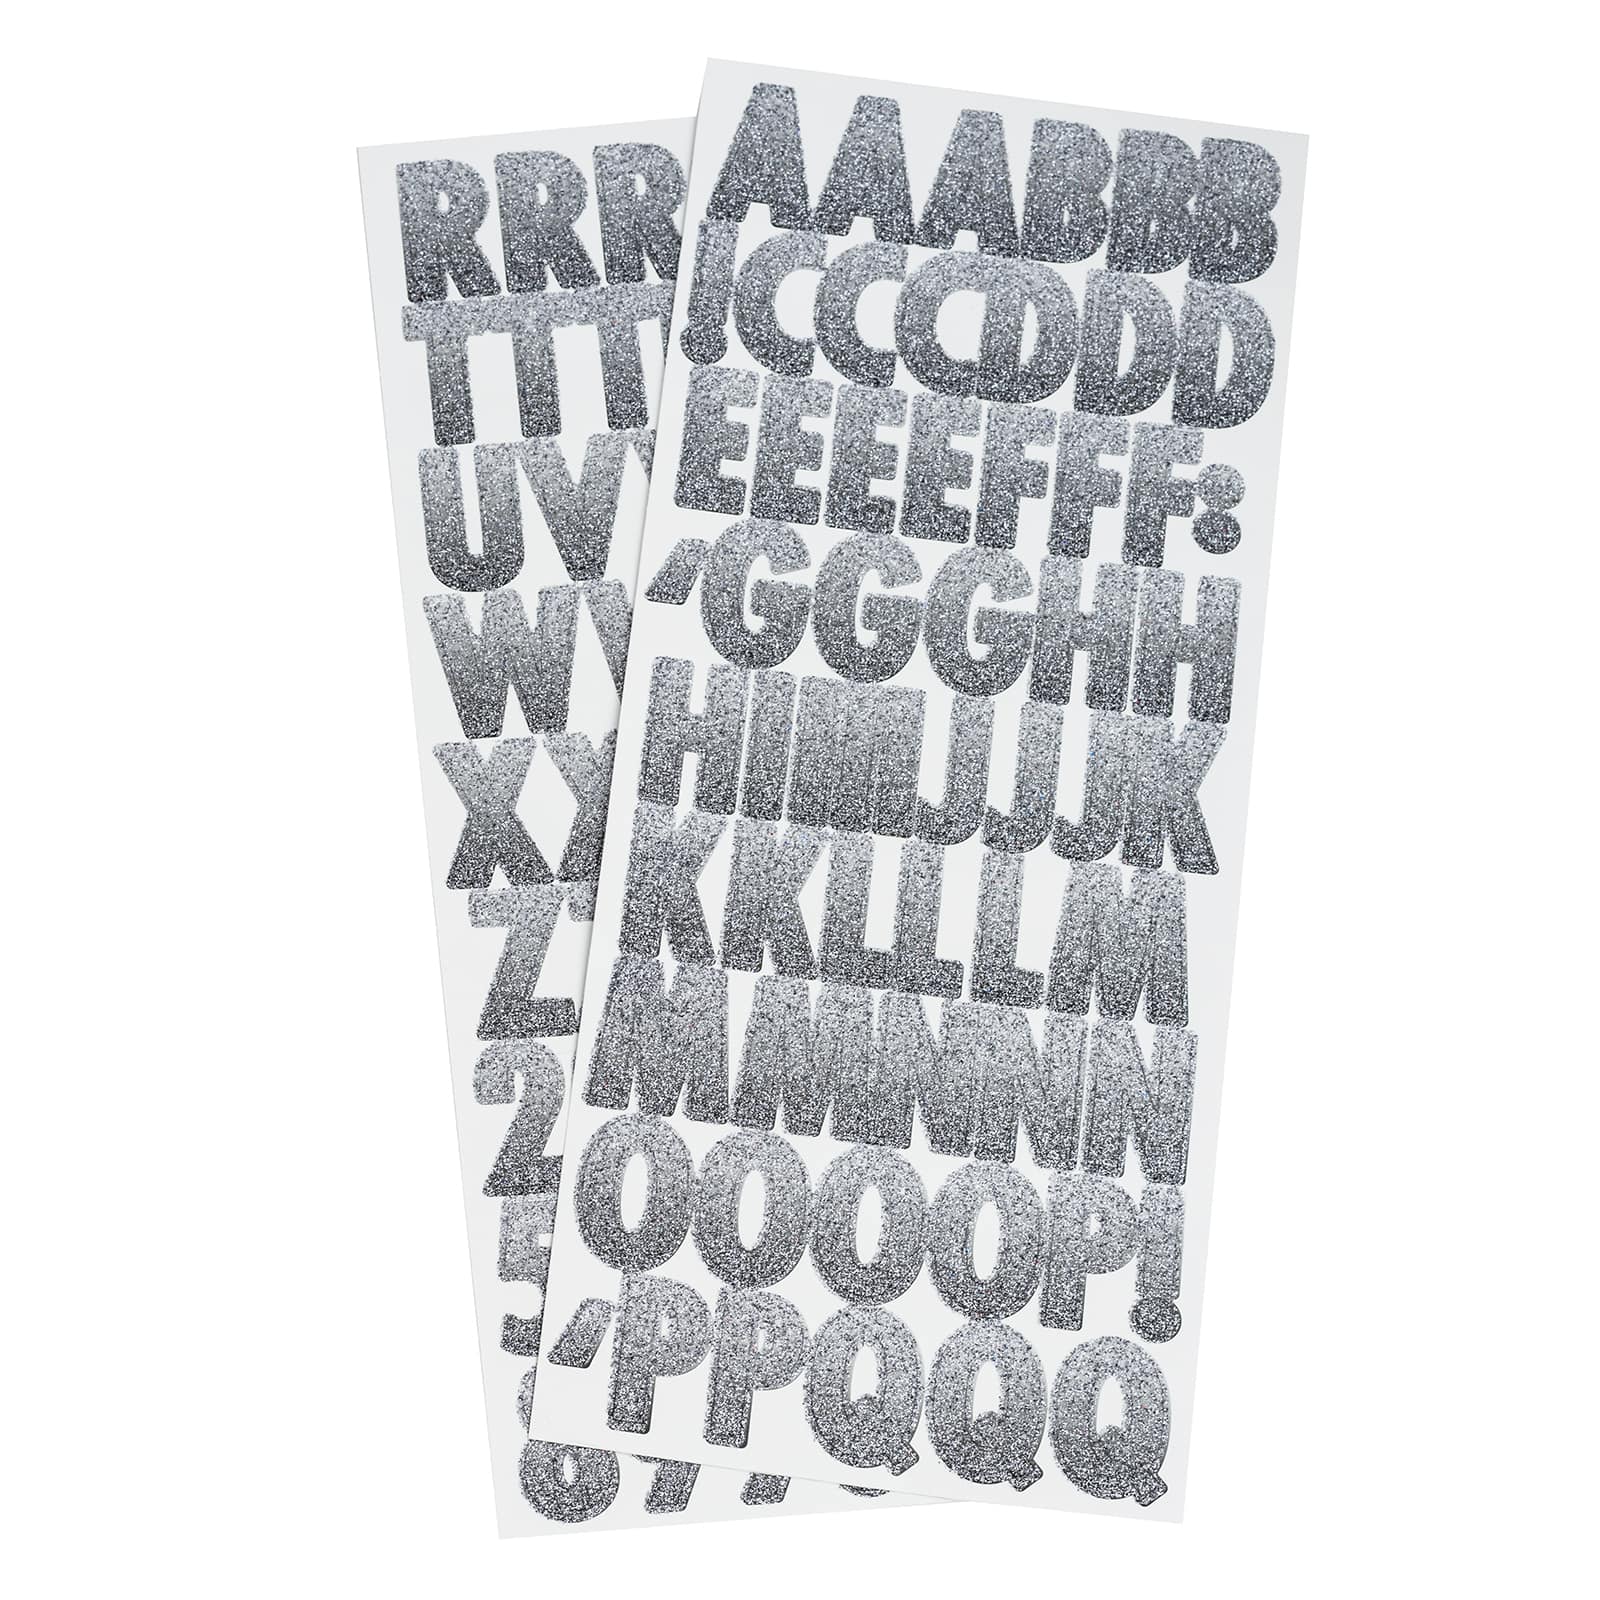 Recollections Glitter Alphabet Stickers - Neutral Ombre - Each